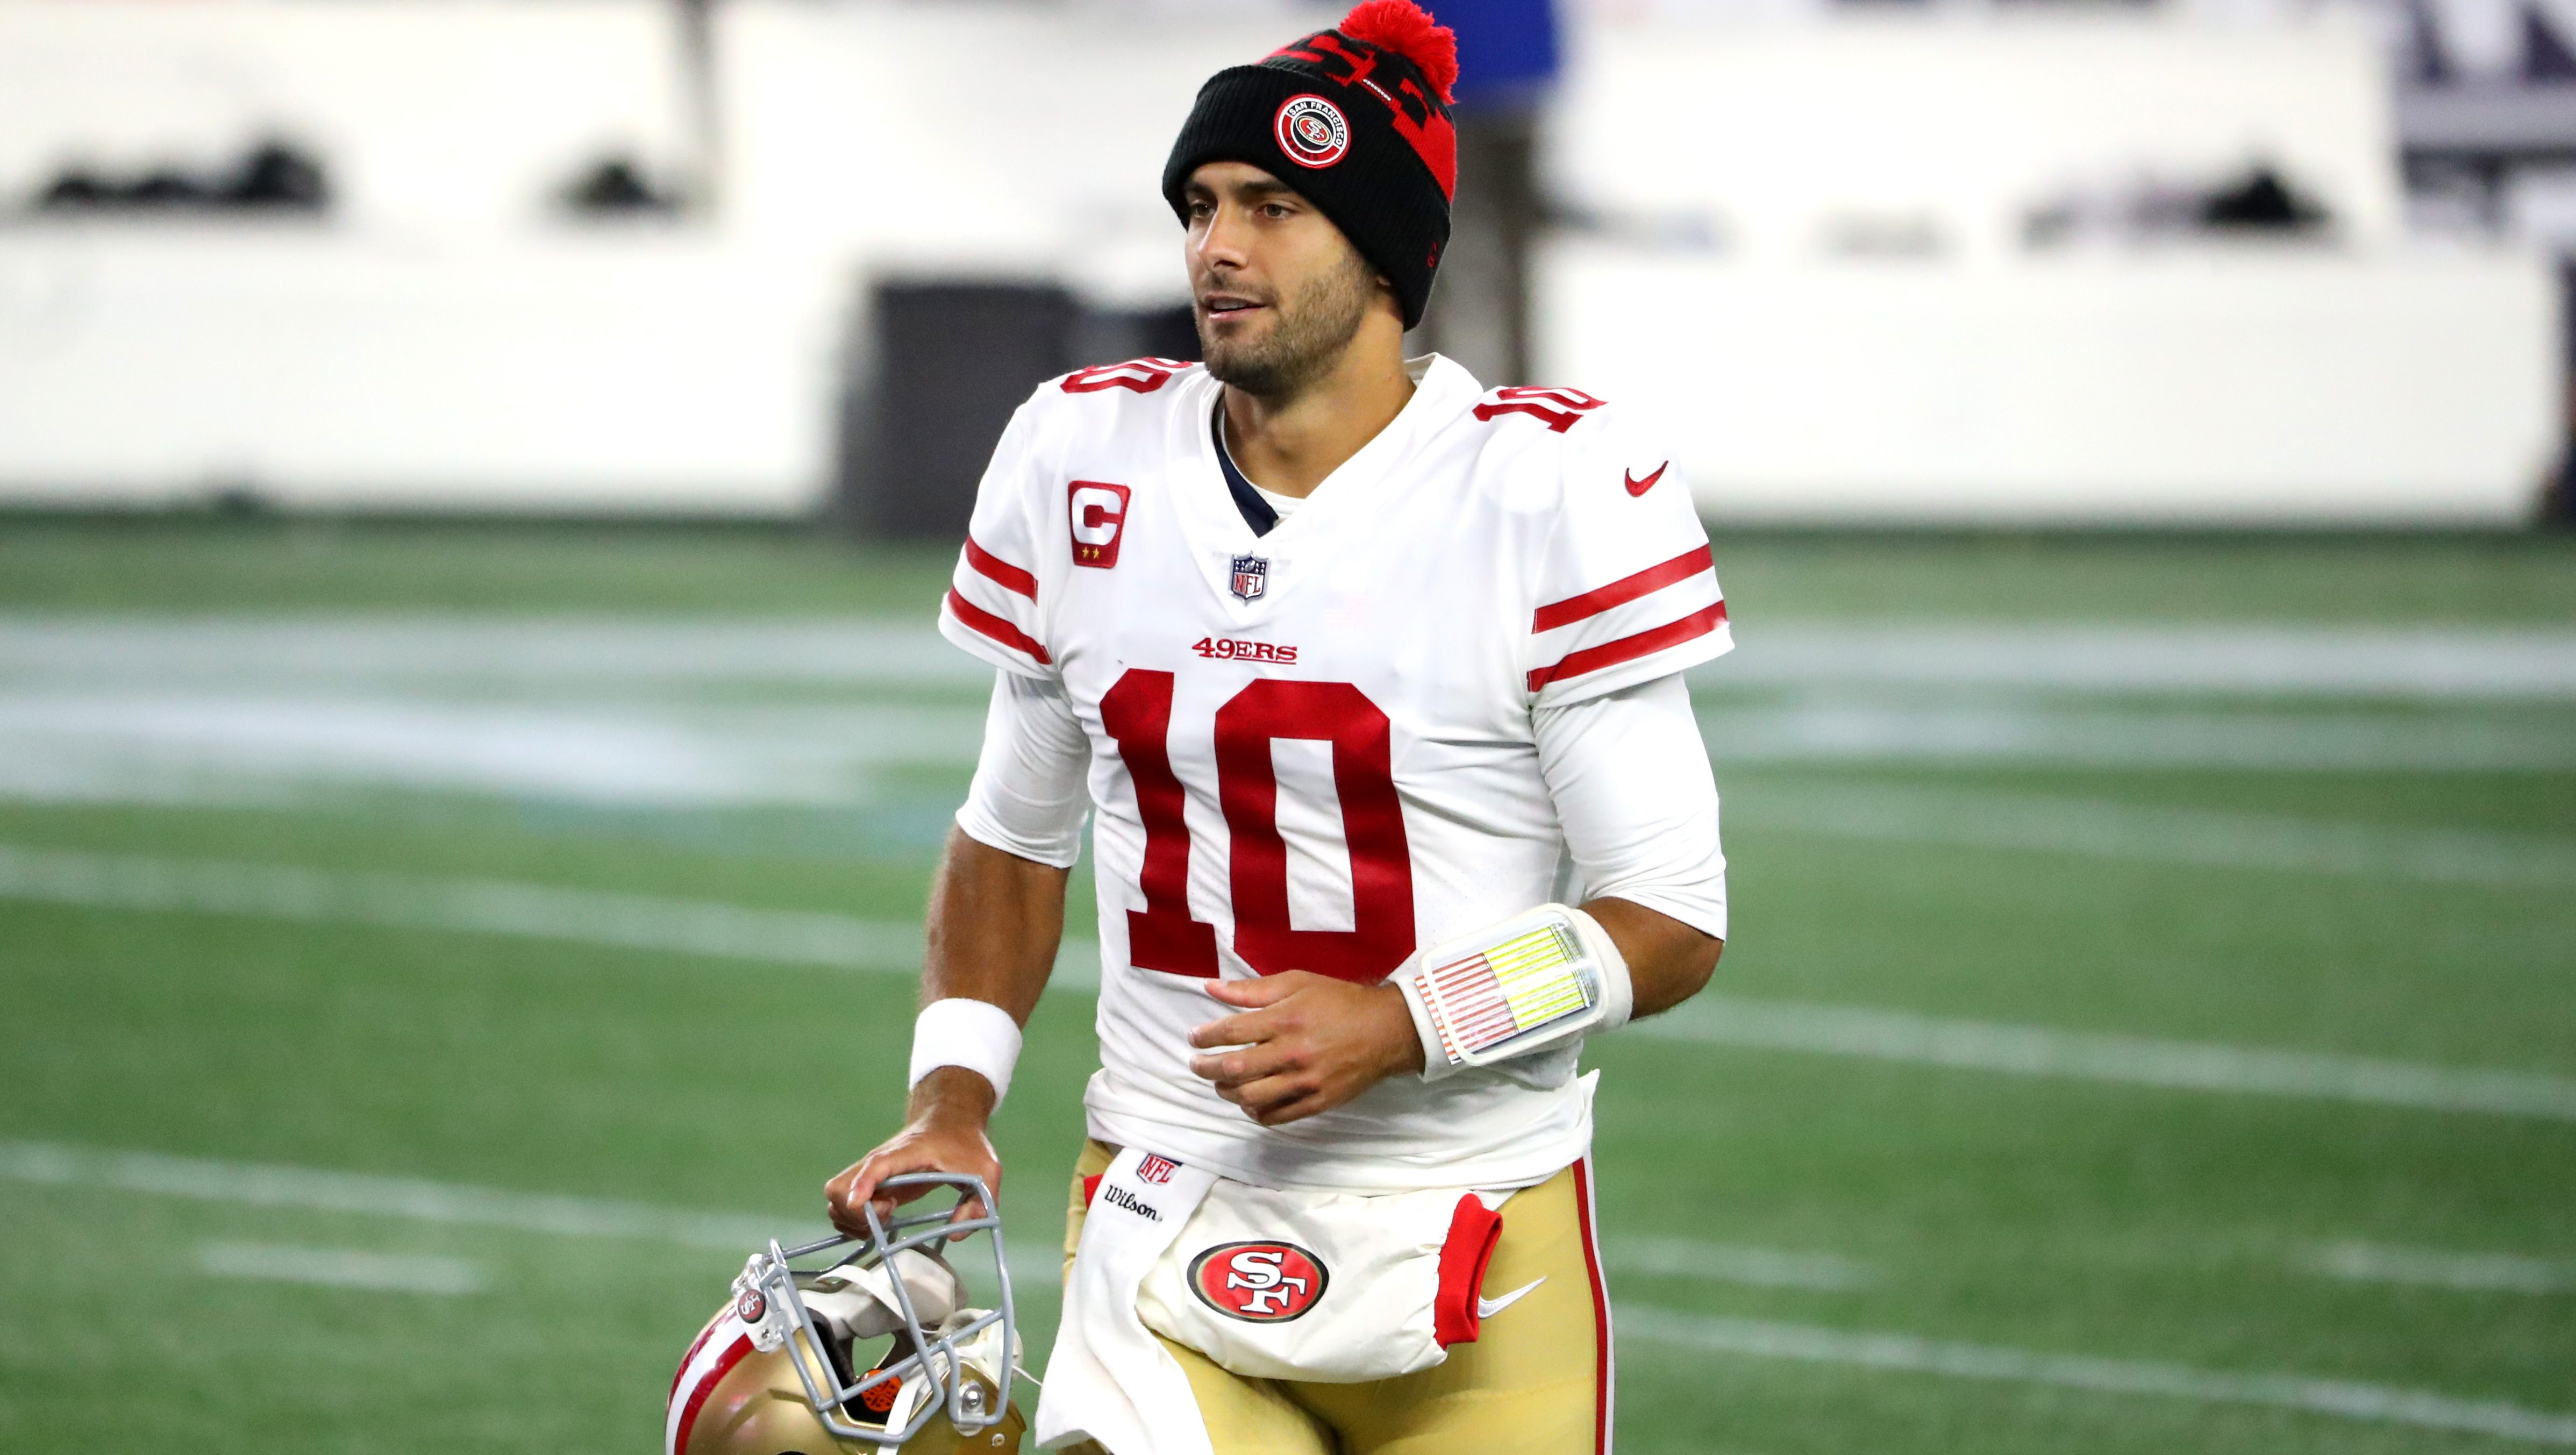 49ers Rumors: Jimmy Garoppolo Played Last Game With San Francisco